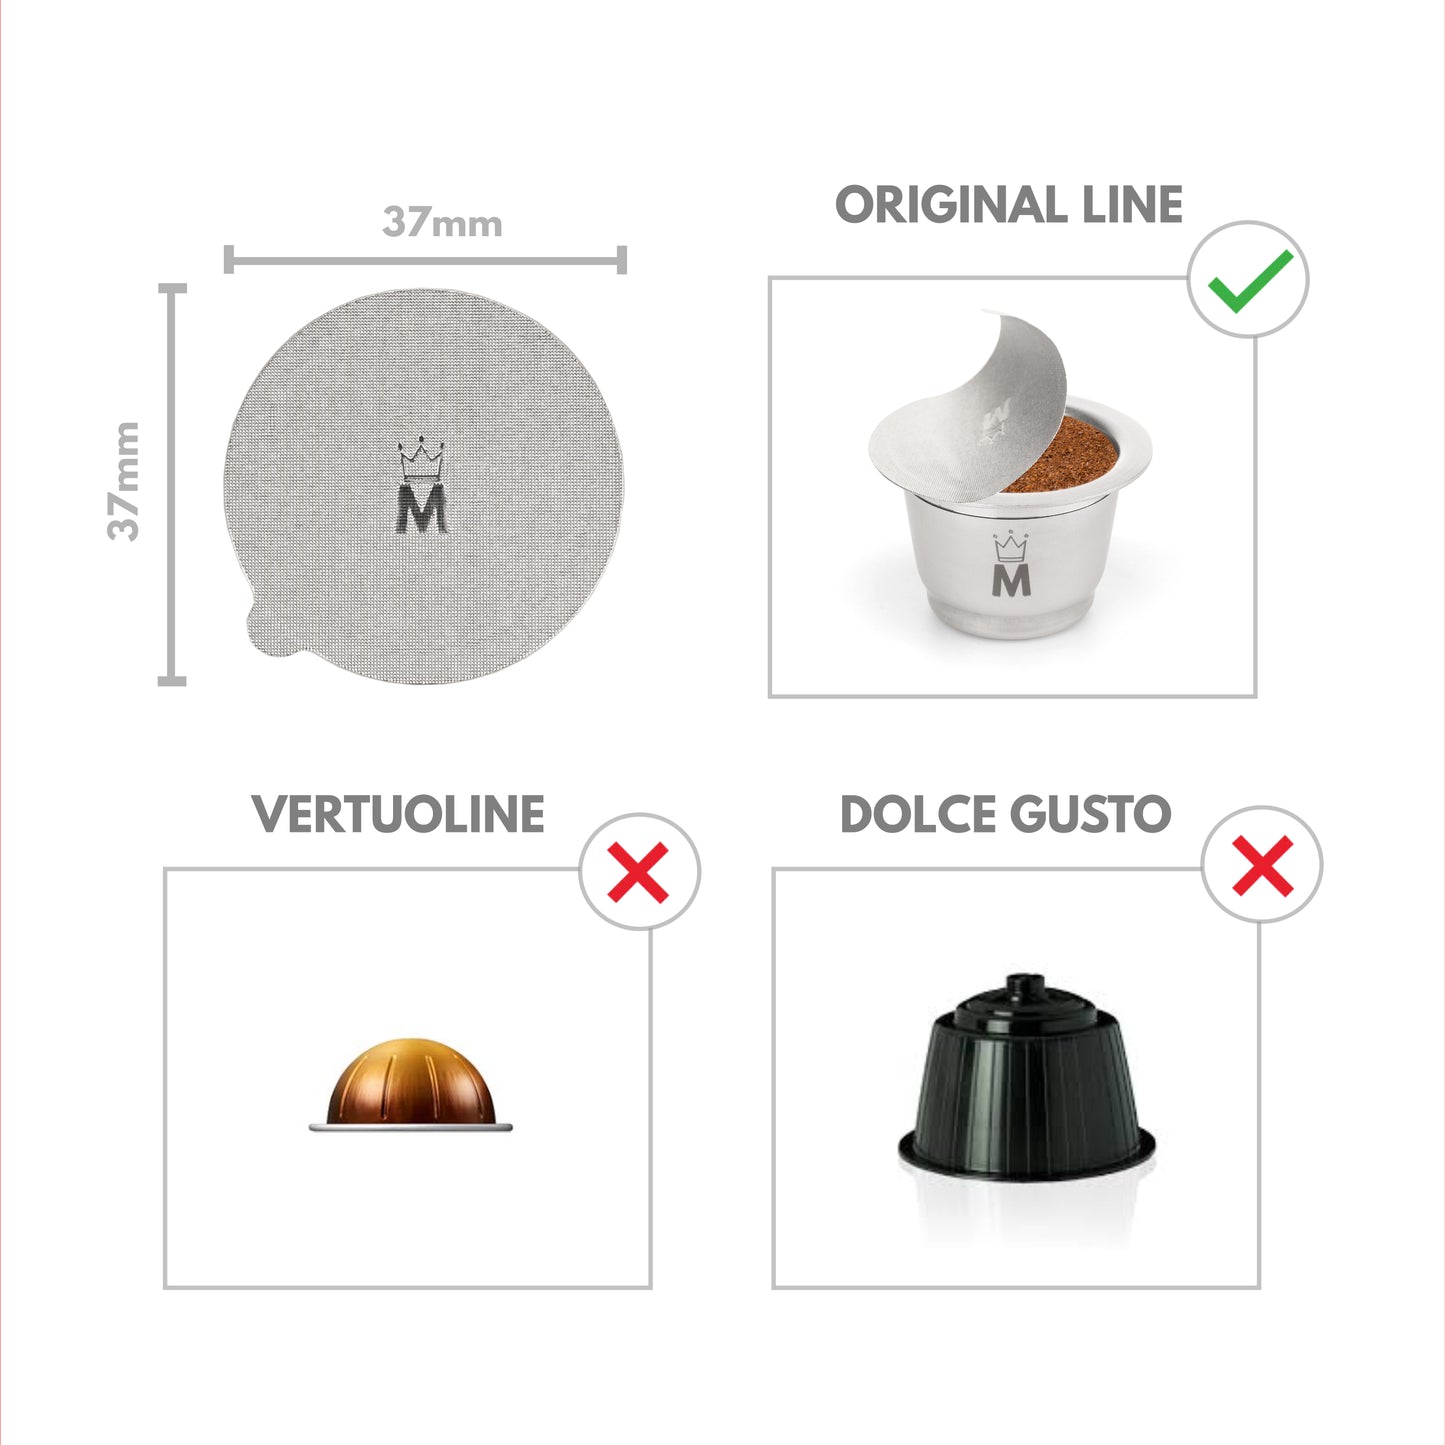 4 Refillable Coffee Pods Compatible with Nespresso - 200 Aluminum Lids